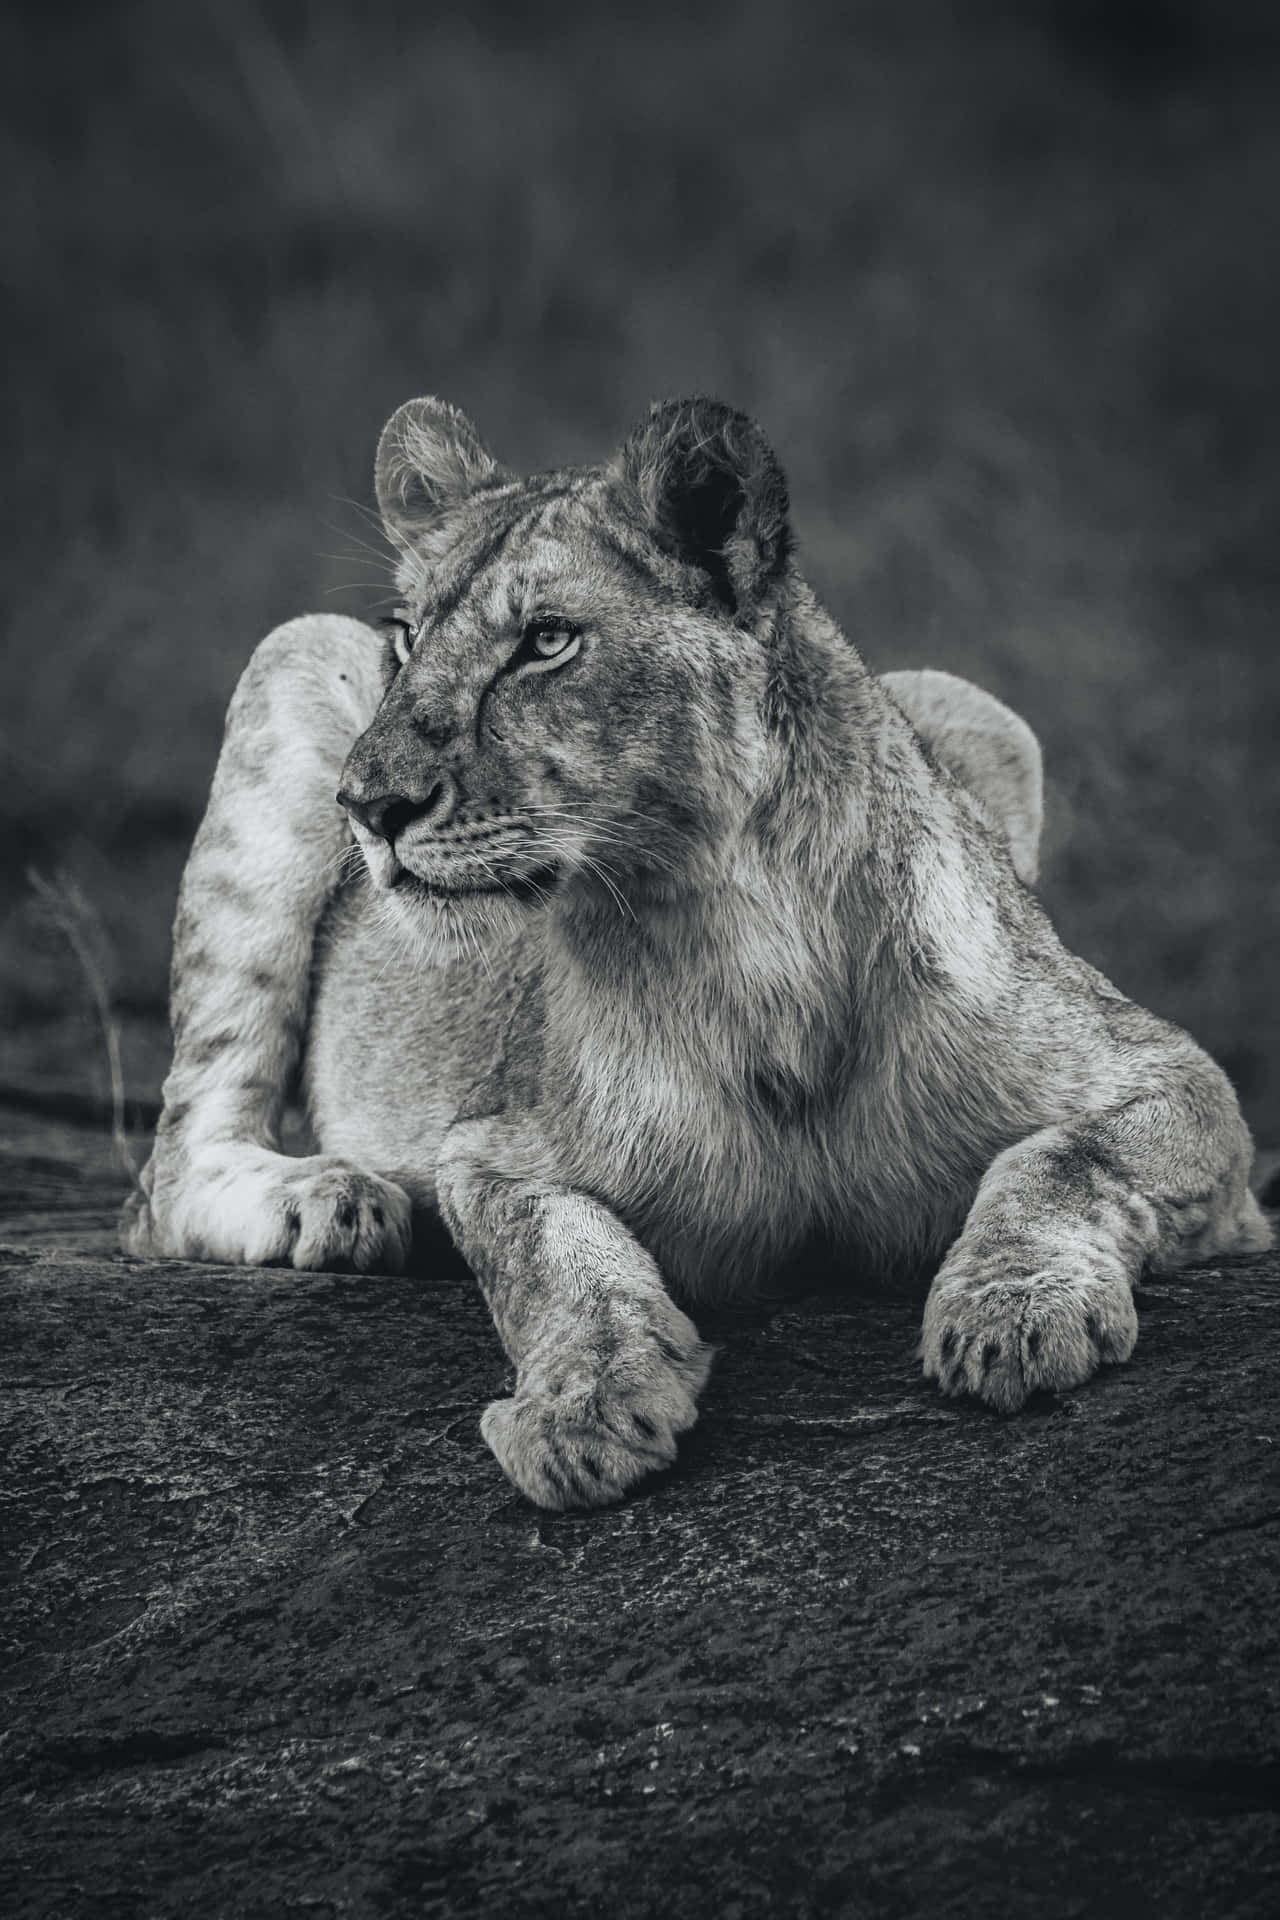 Lioness In Grayscale Wallpaper